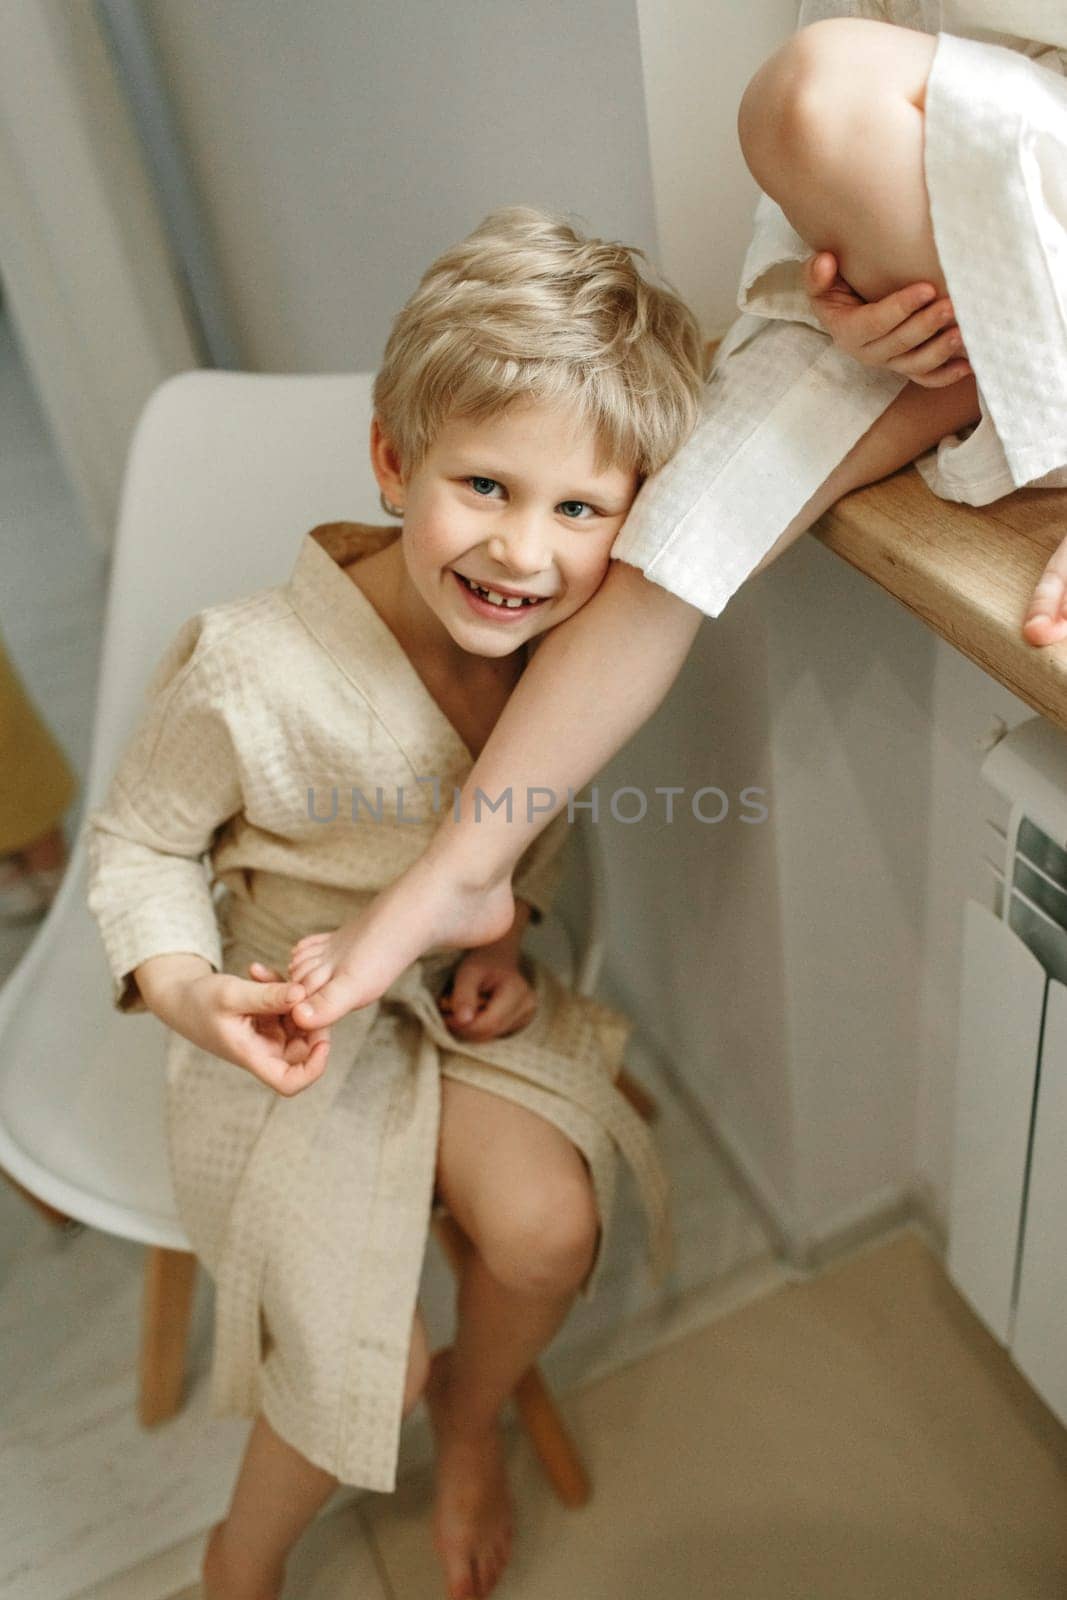 Portrait of a fair-haired smiling boy in a bathrobe who sits on a chair and leans on the girl's leg.